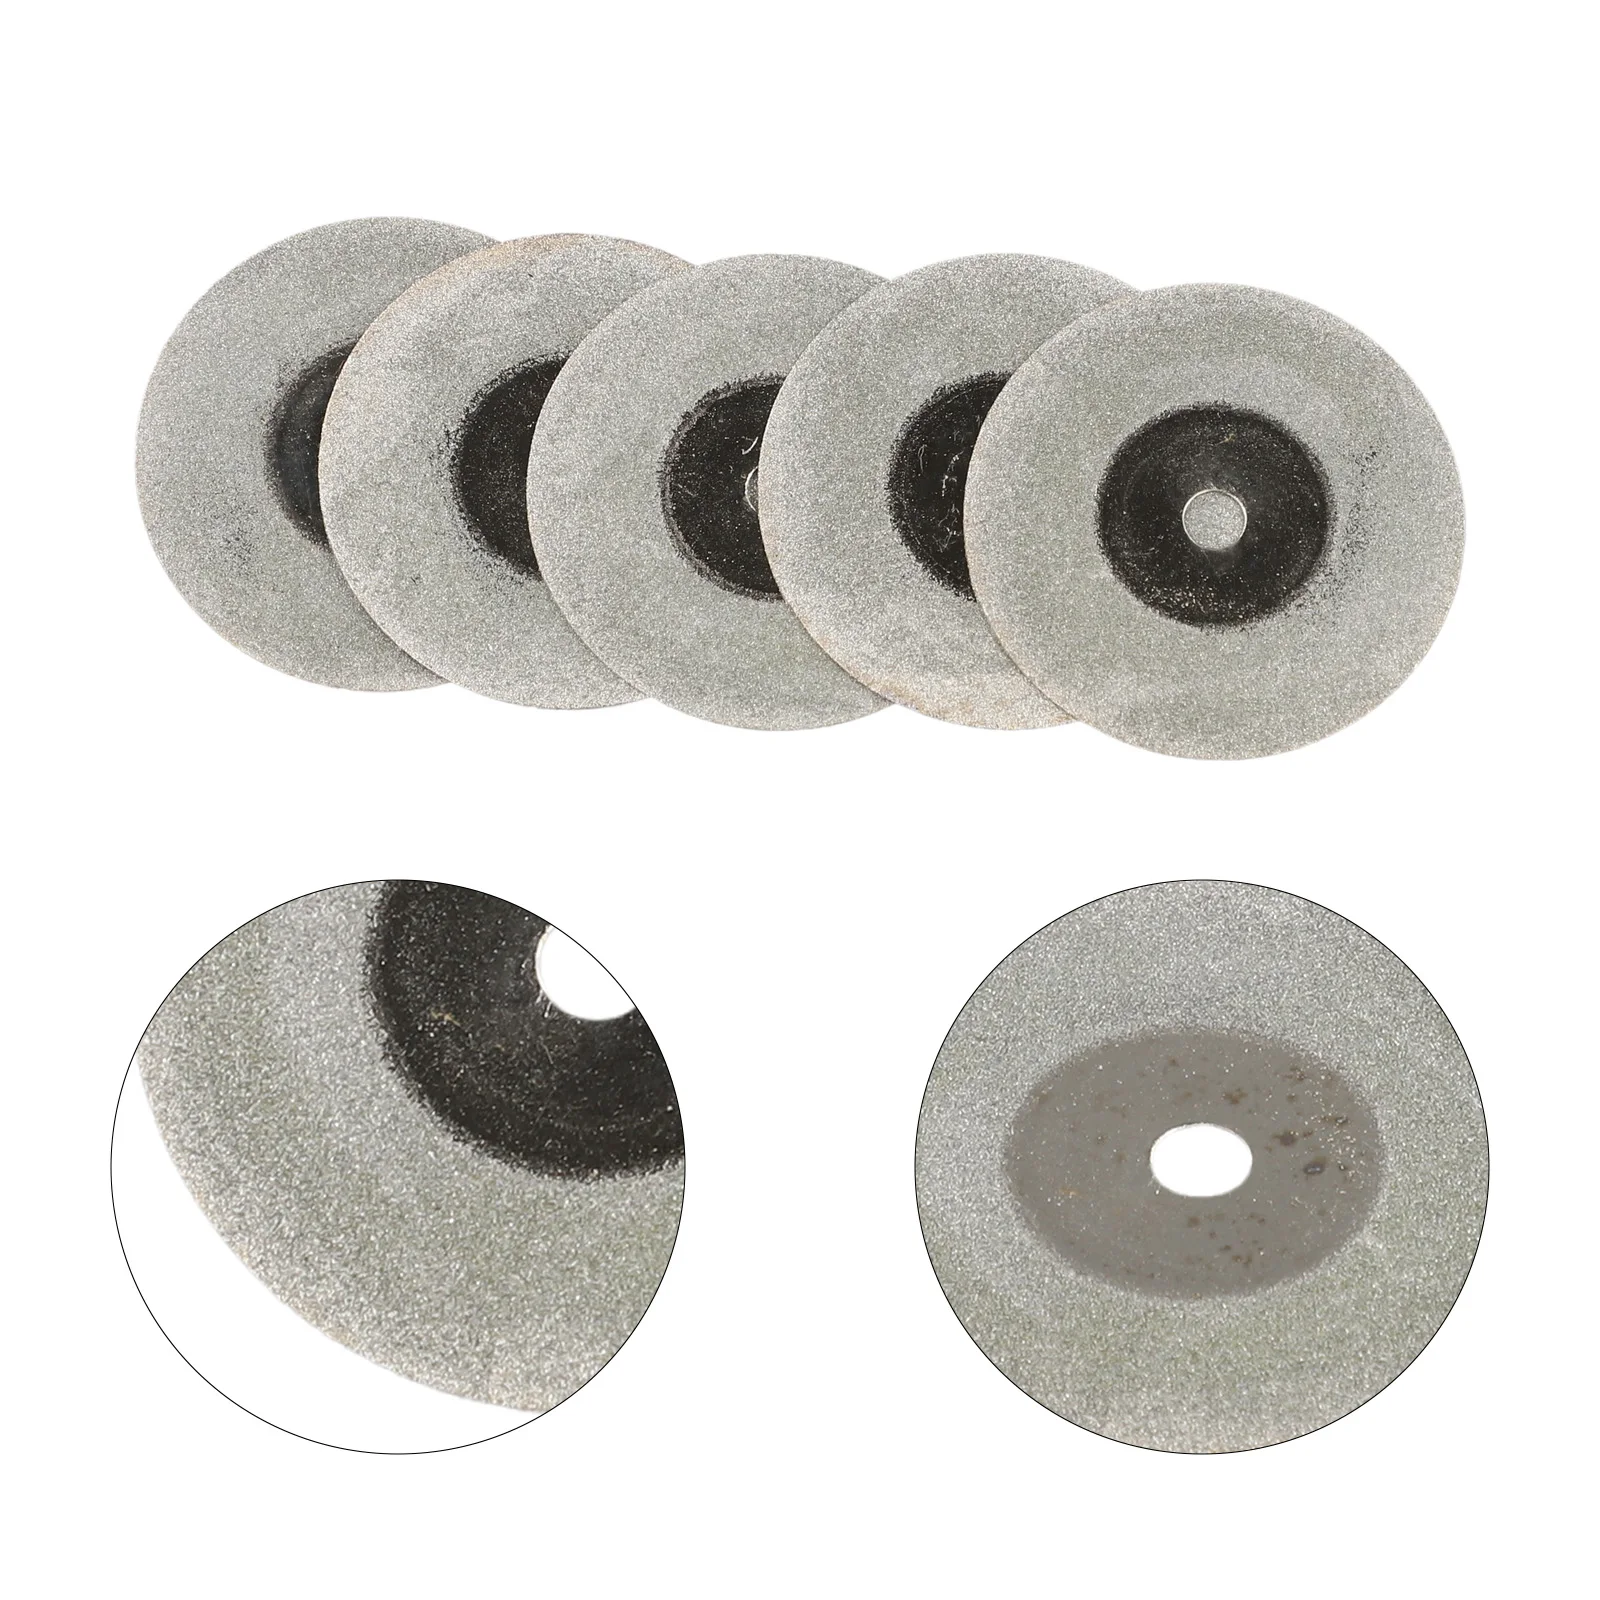 5pcs Cutting Discs 60mm Diamond Saw Blade Cutting Disc Glass Tiles Cutting Blades​ ​power Tools Replacement Accessories remtekey 5pcs for ford f 250 350 450 550 m3n a2c93142600 smart emergency key blade replacement